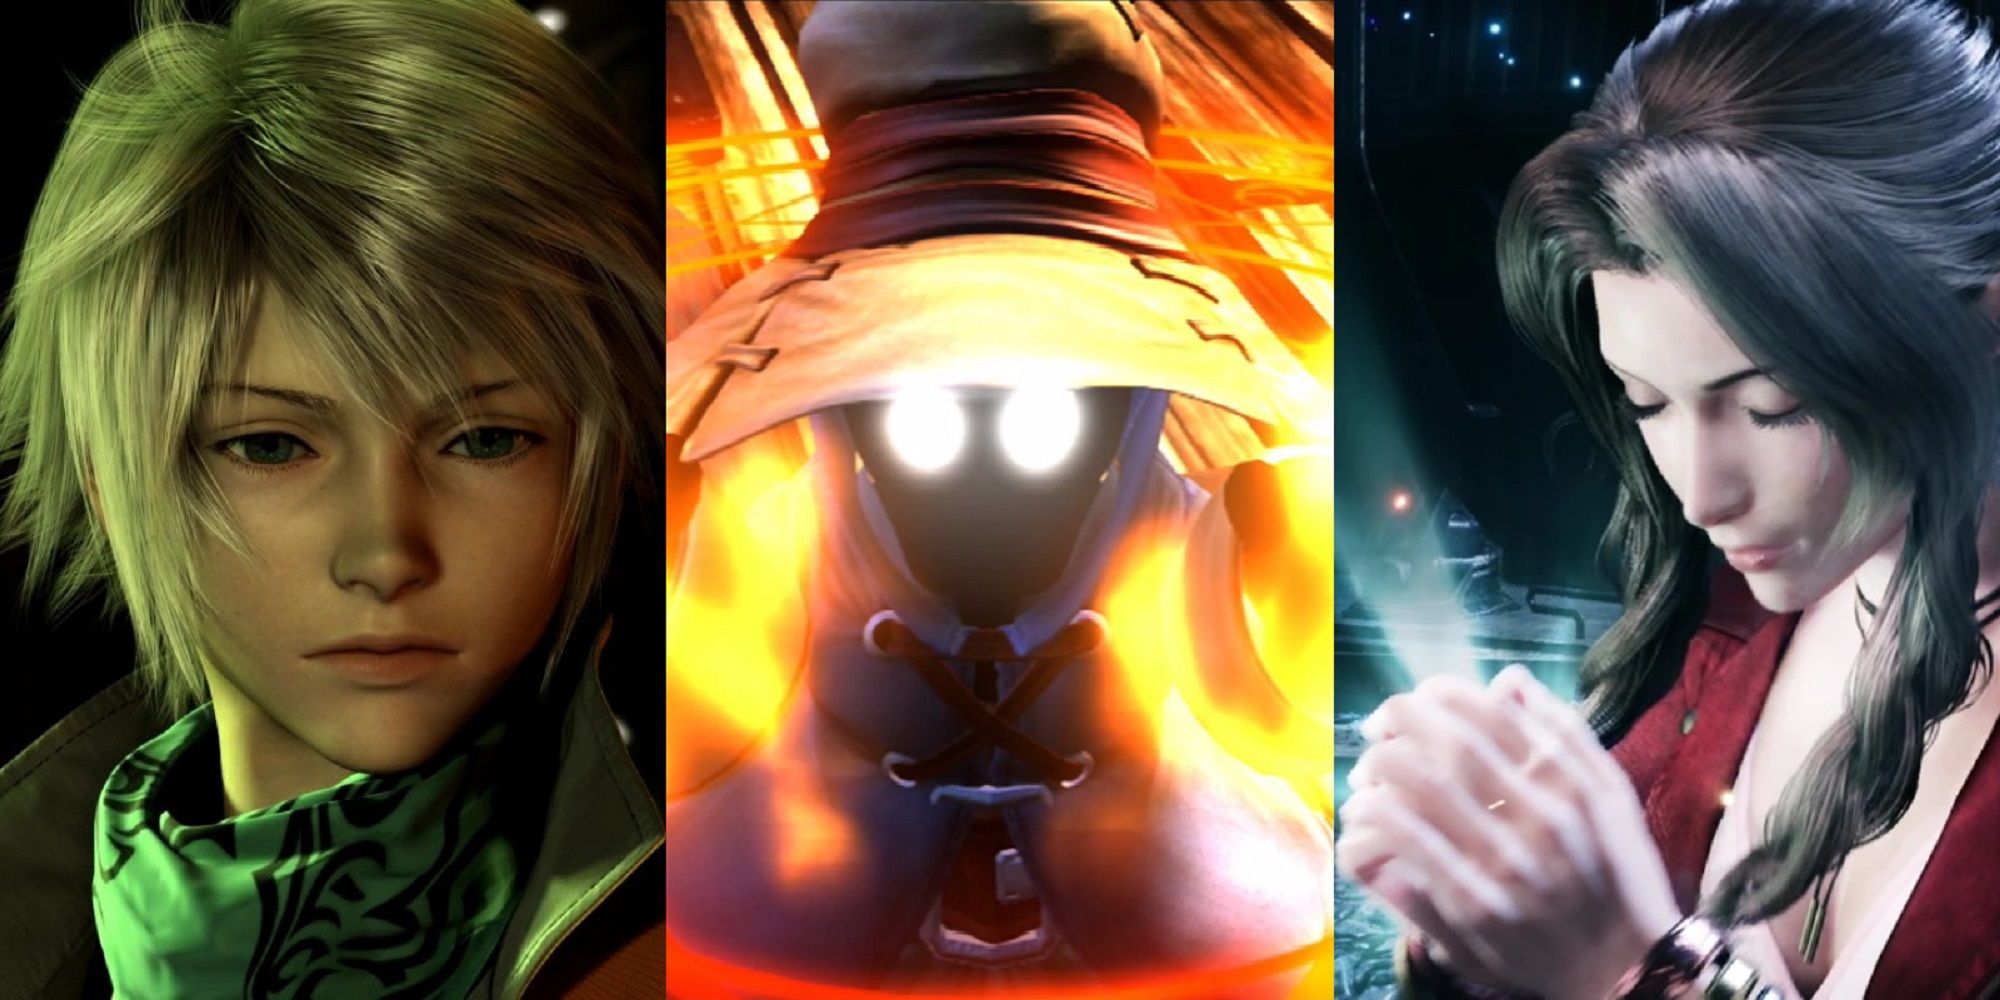 Split image of Hope at the Hanging Edge in Final Fantasy 13, Vivi using magic in Final Fantasy 9, and Aerith casting Healing Wind in Final Fantasy 7